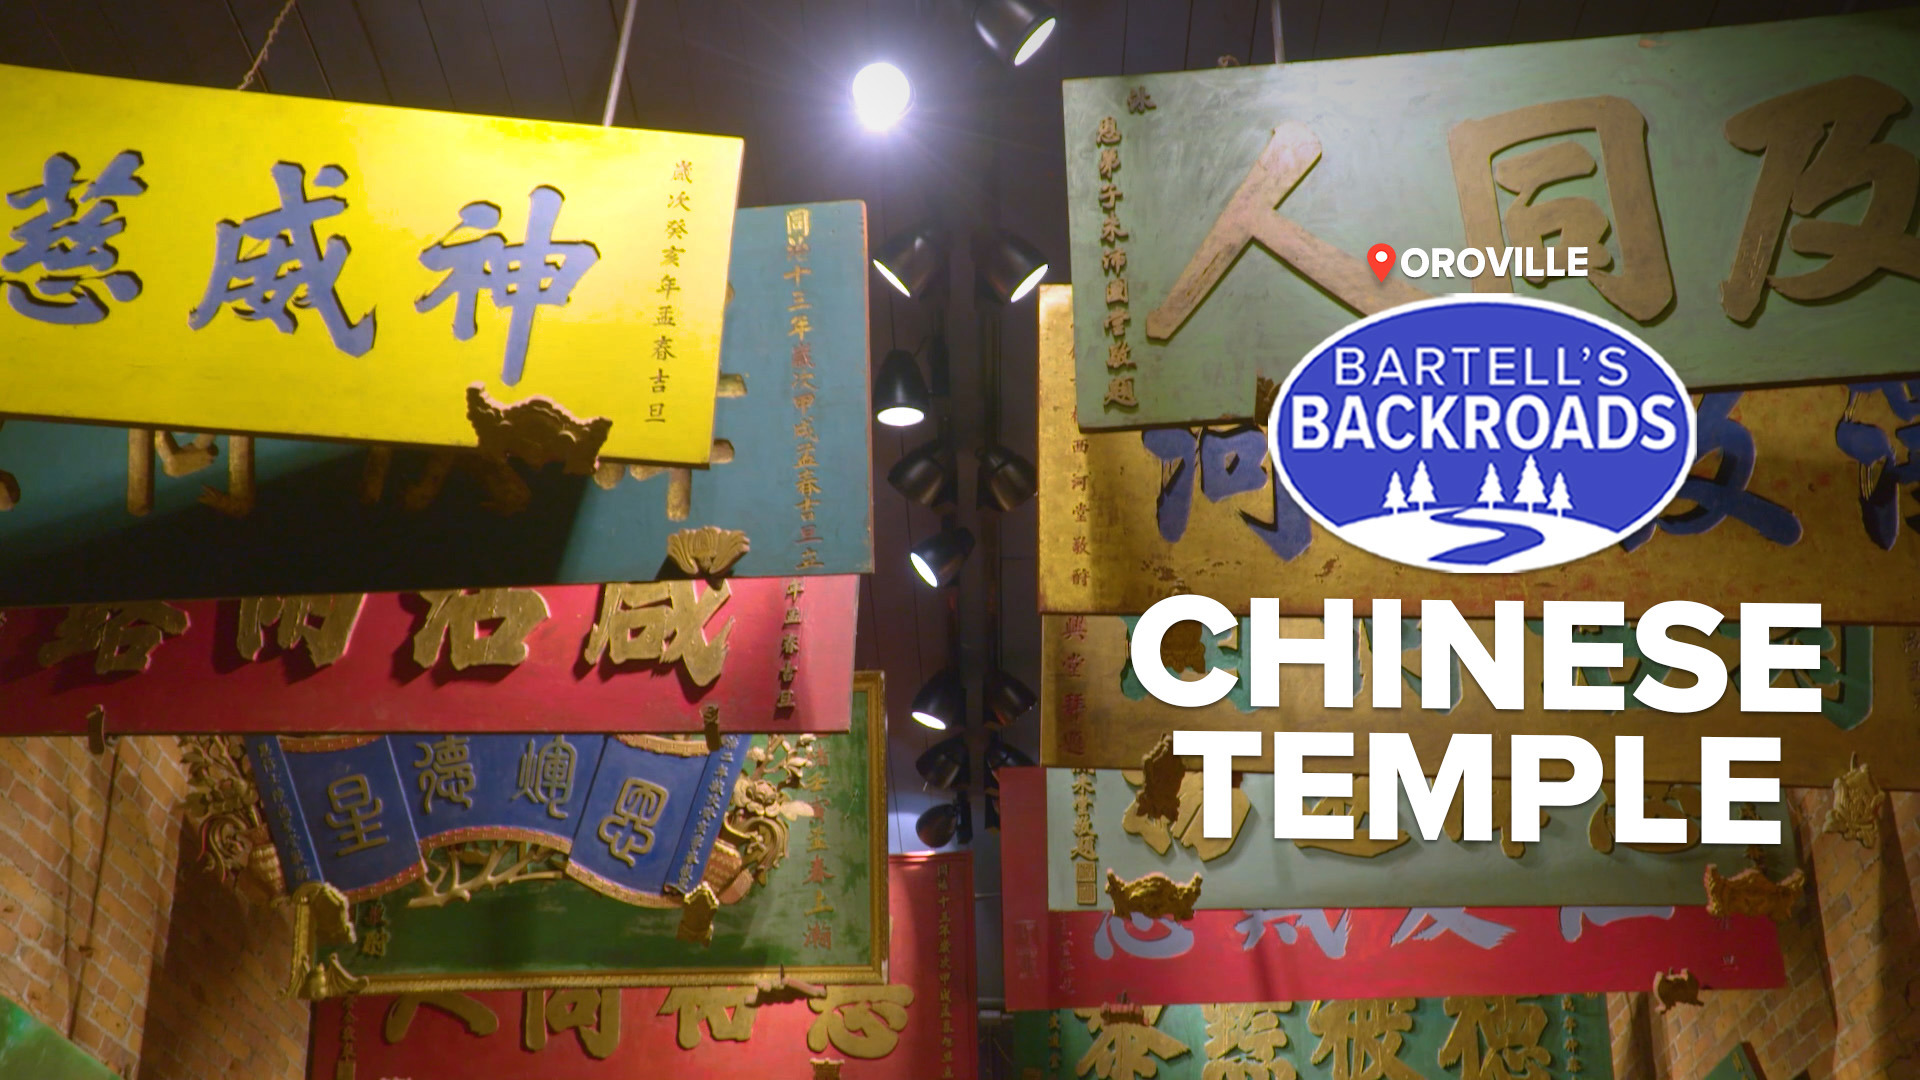 Oroville's Chinese Temple shows how Chinese culture shaped the city from the gold rush through today.